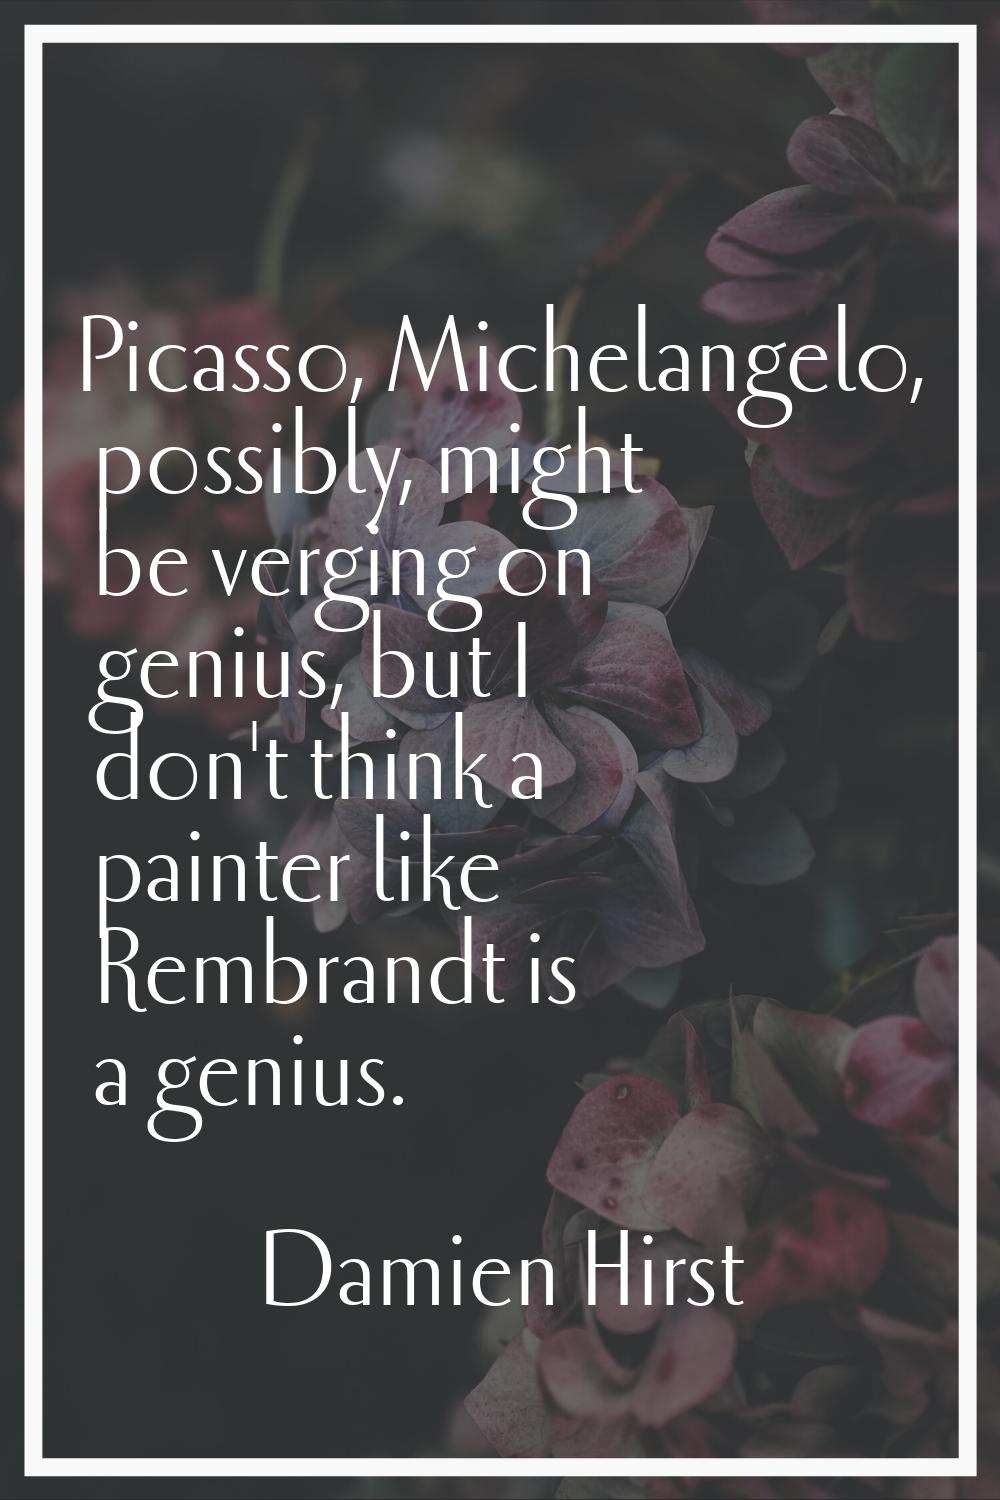 Picasso, Michelangelo, possibly, might be verging on genius, but I don't think a painter like Rembr